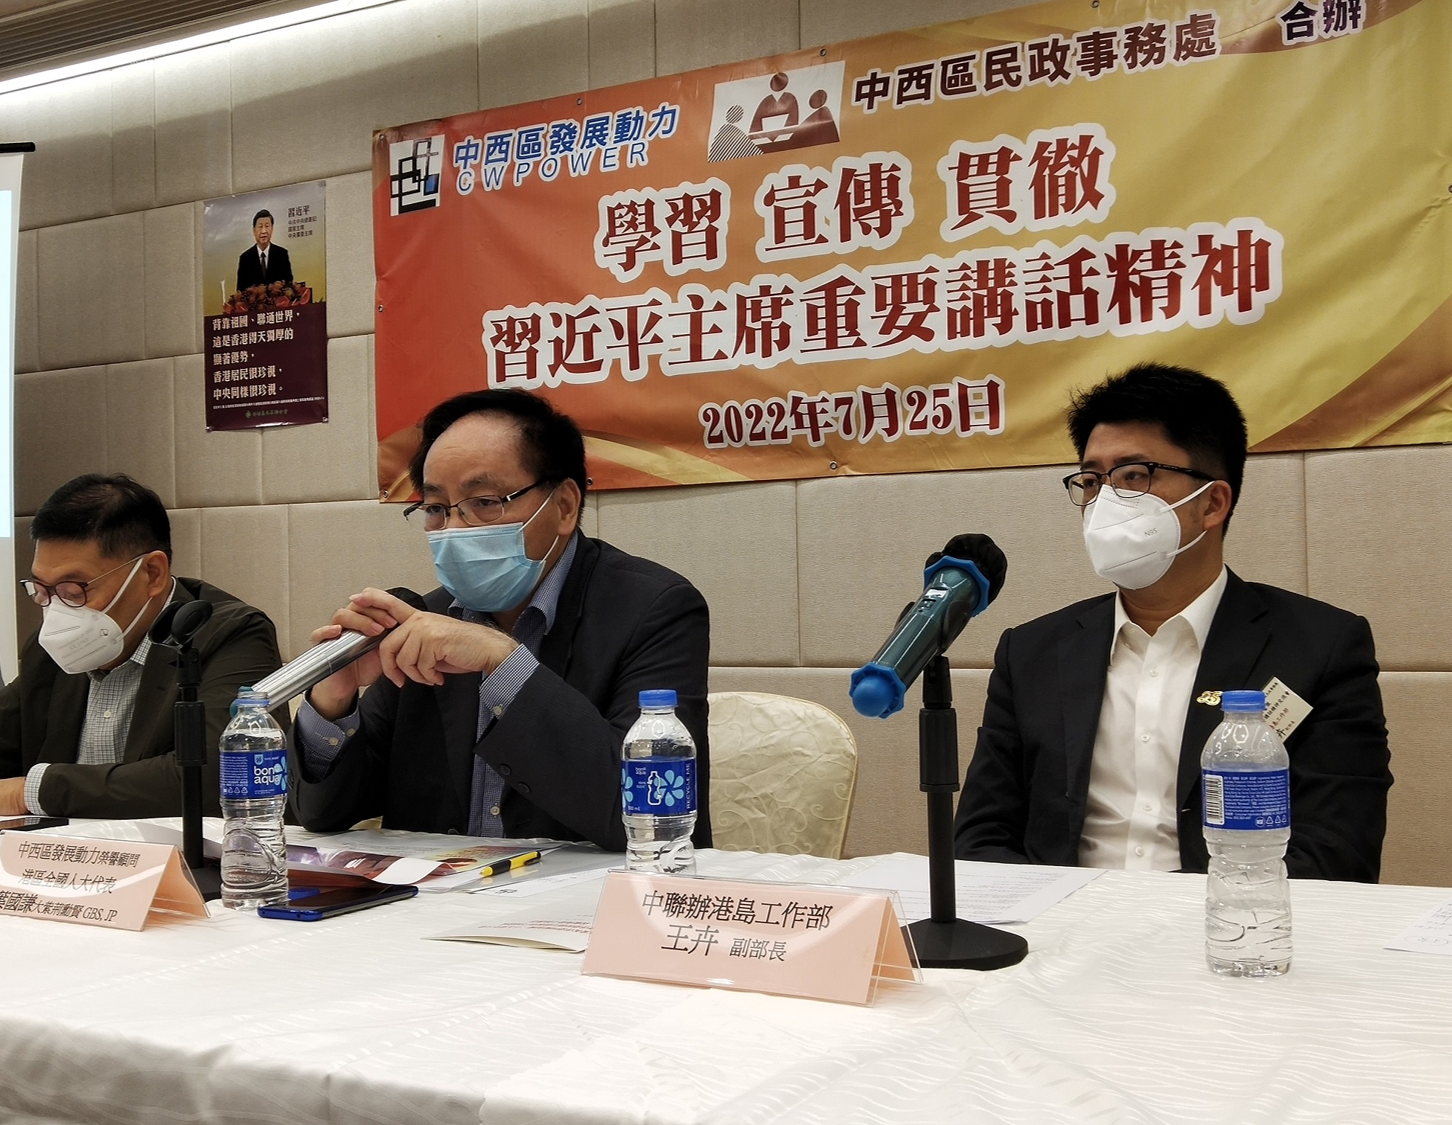 The Central and Western District Office, in collaboration with CW Power, jointly held the "Session to Learn About, Promote and Implement the Spirit of President Xi's Important Speech" in Central on July 25. Photo shows Hong Kong Deputy to the National People's Congress Mr Ip Kwok-him (centre), delivering a speech at the session.